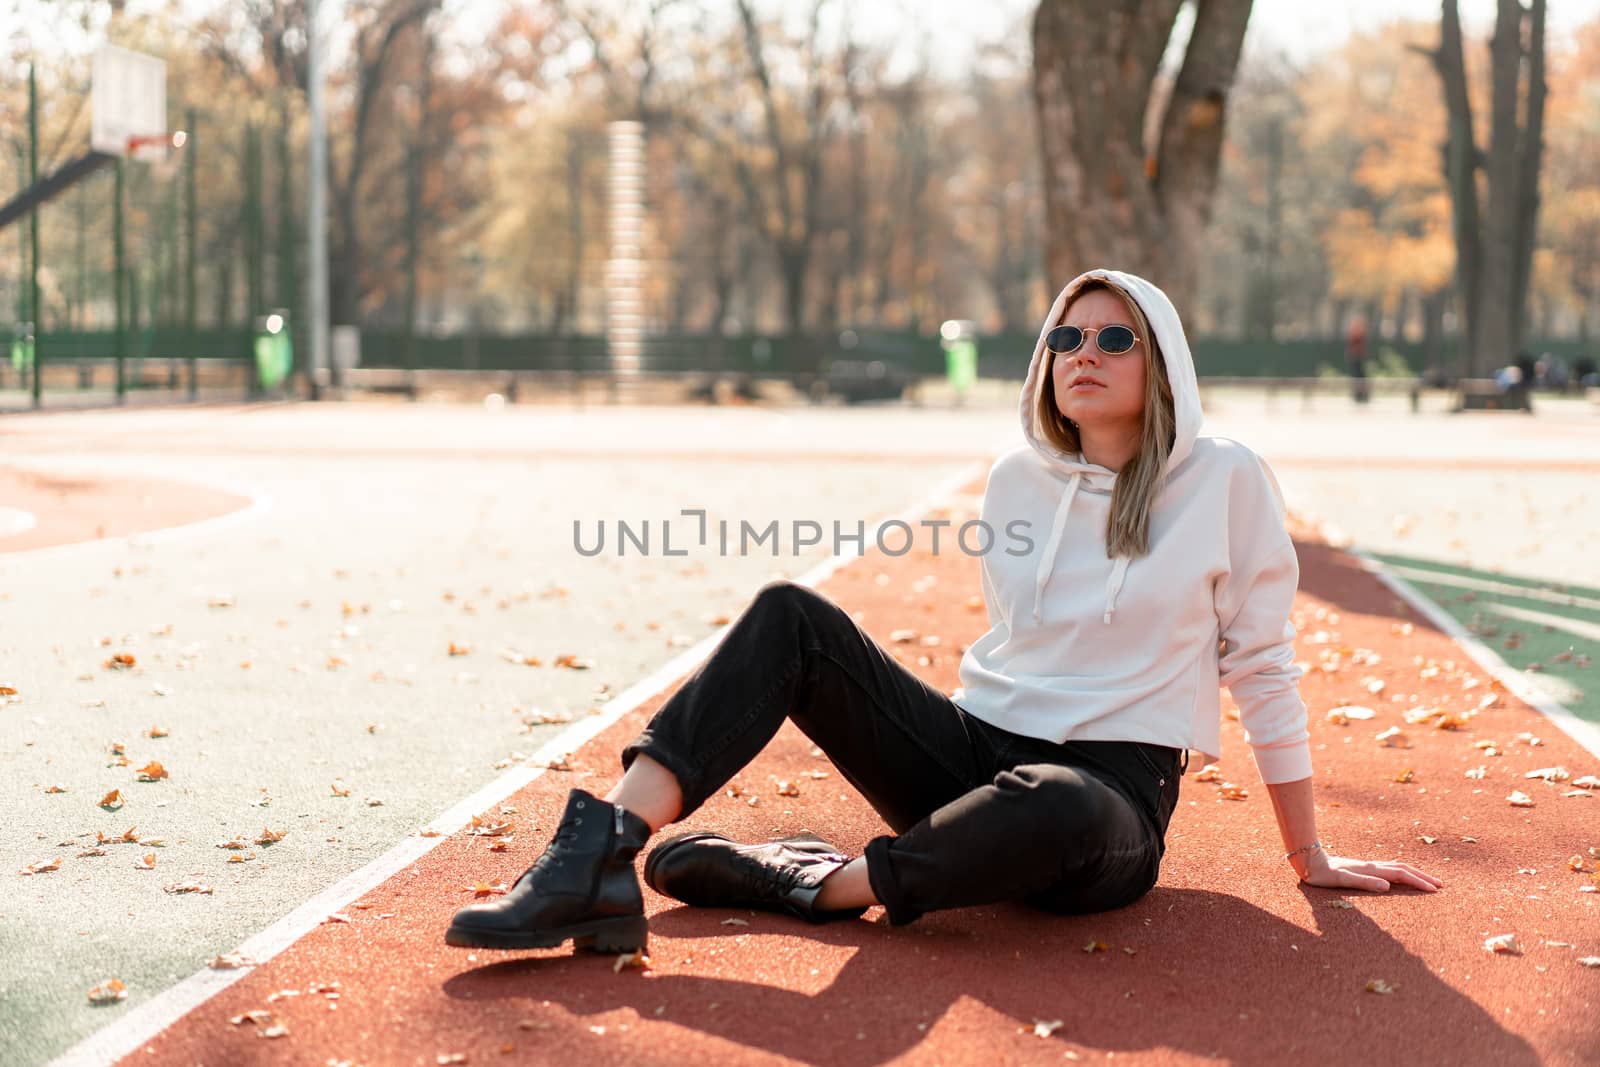 Outdoor portrait of young beautiful woman with long in sunglasses and a white hooded sweater sitting on the sportsground track. youth culture summer pastime